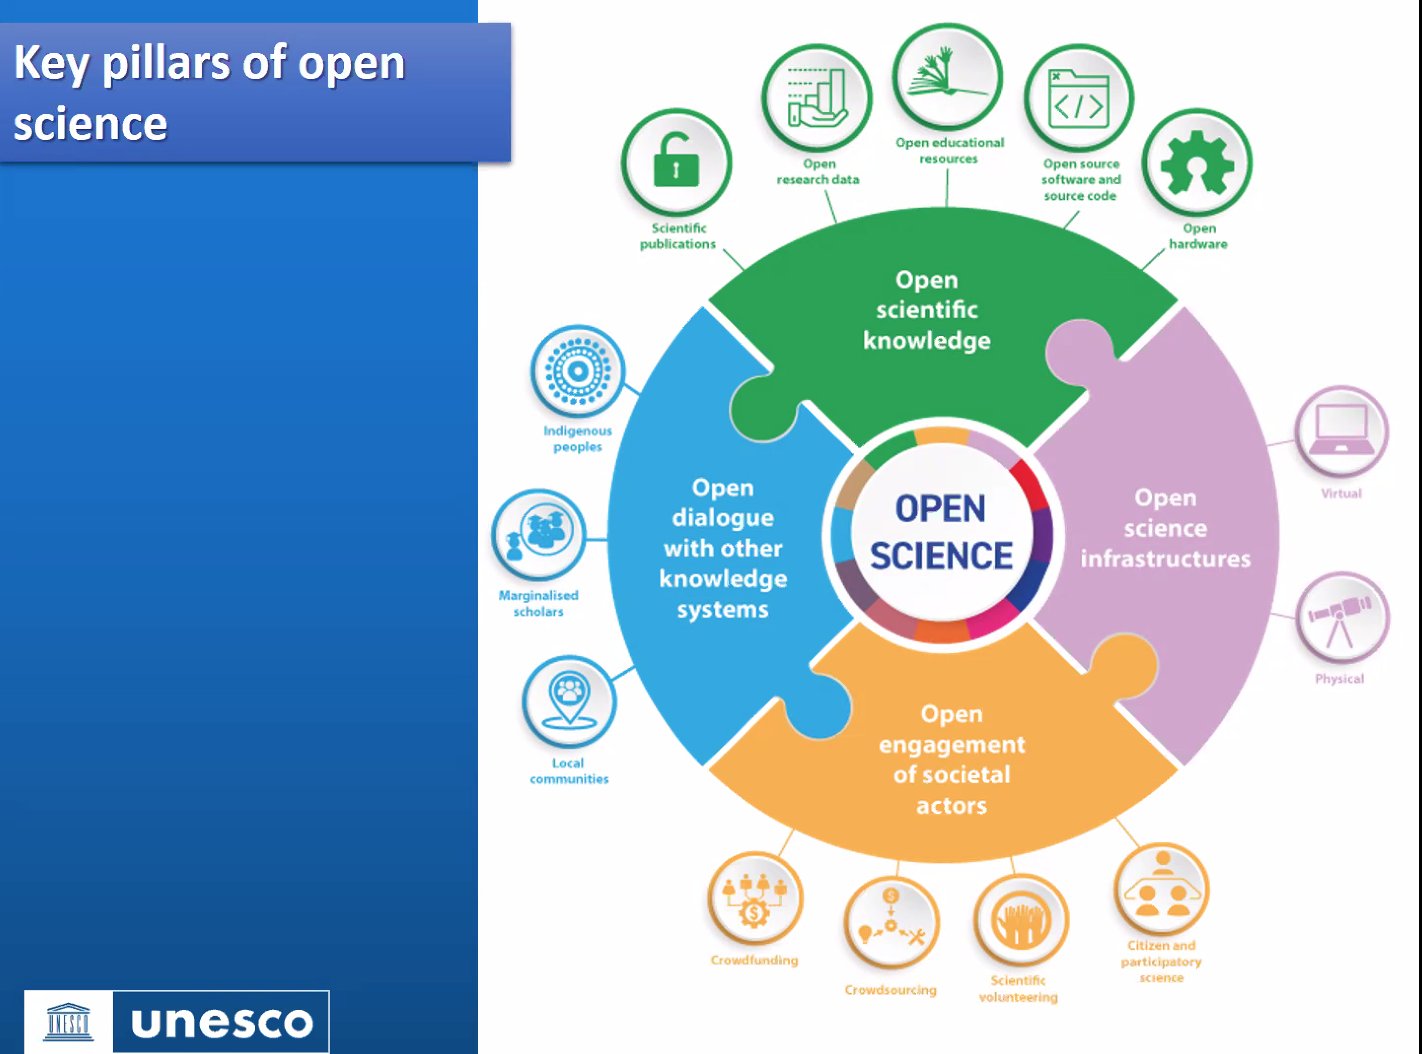 According to UNESCO, Open Science has four pillars: Open science infrastructures, Open engagement of societal actors, Open dialogue with other knowledge systems and Open scientific knowledge